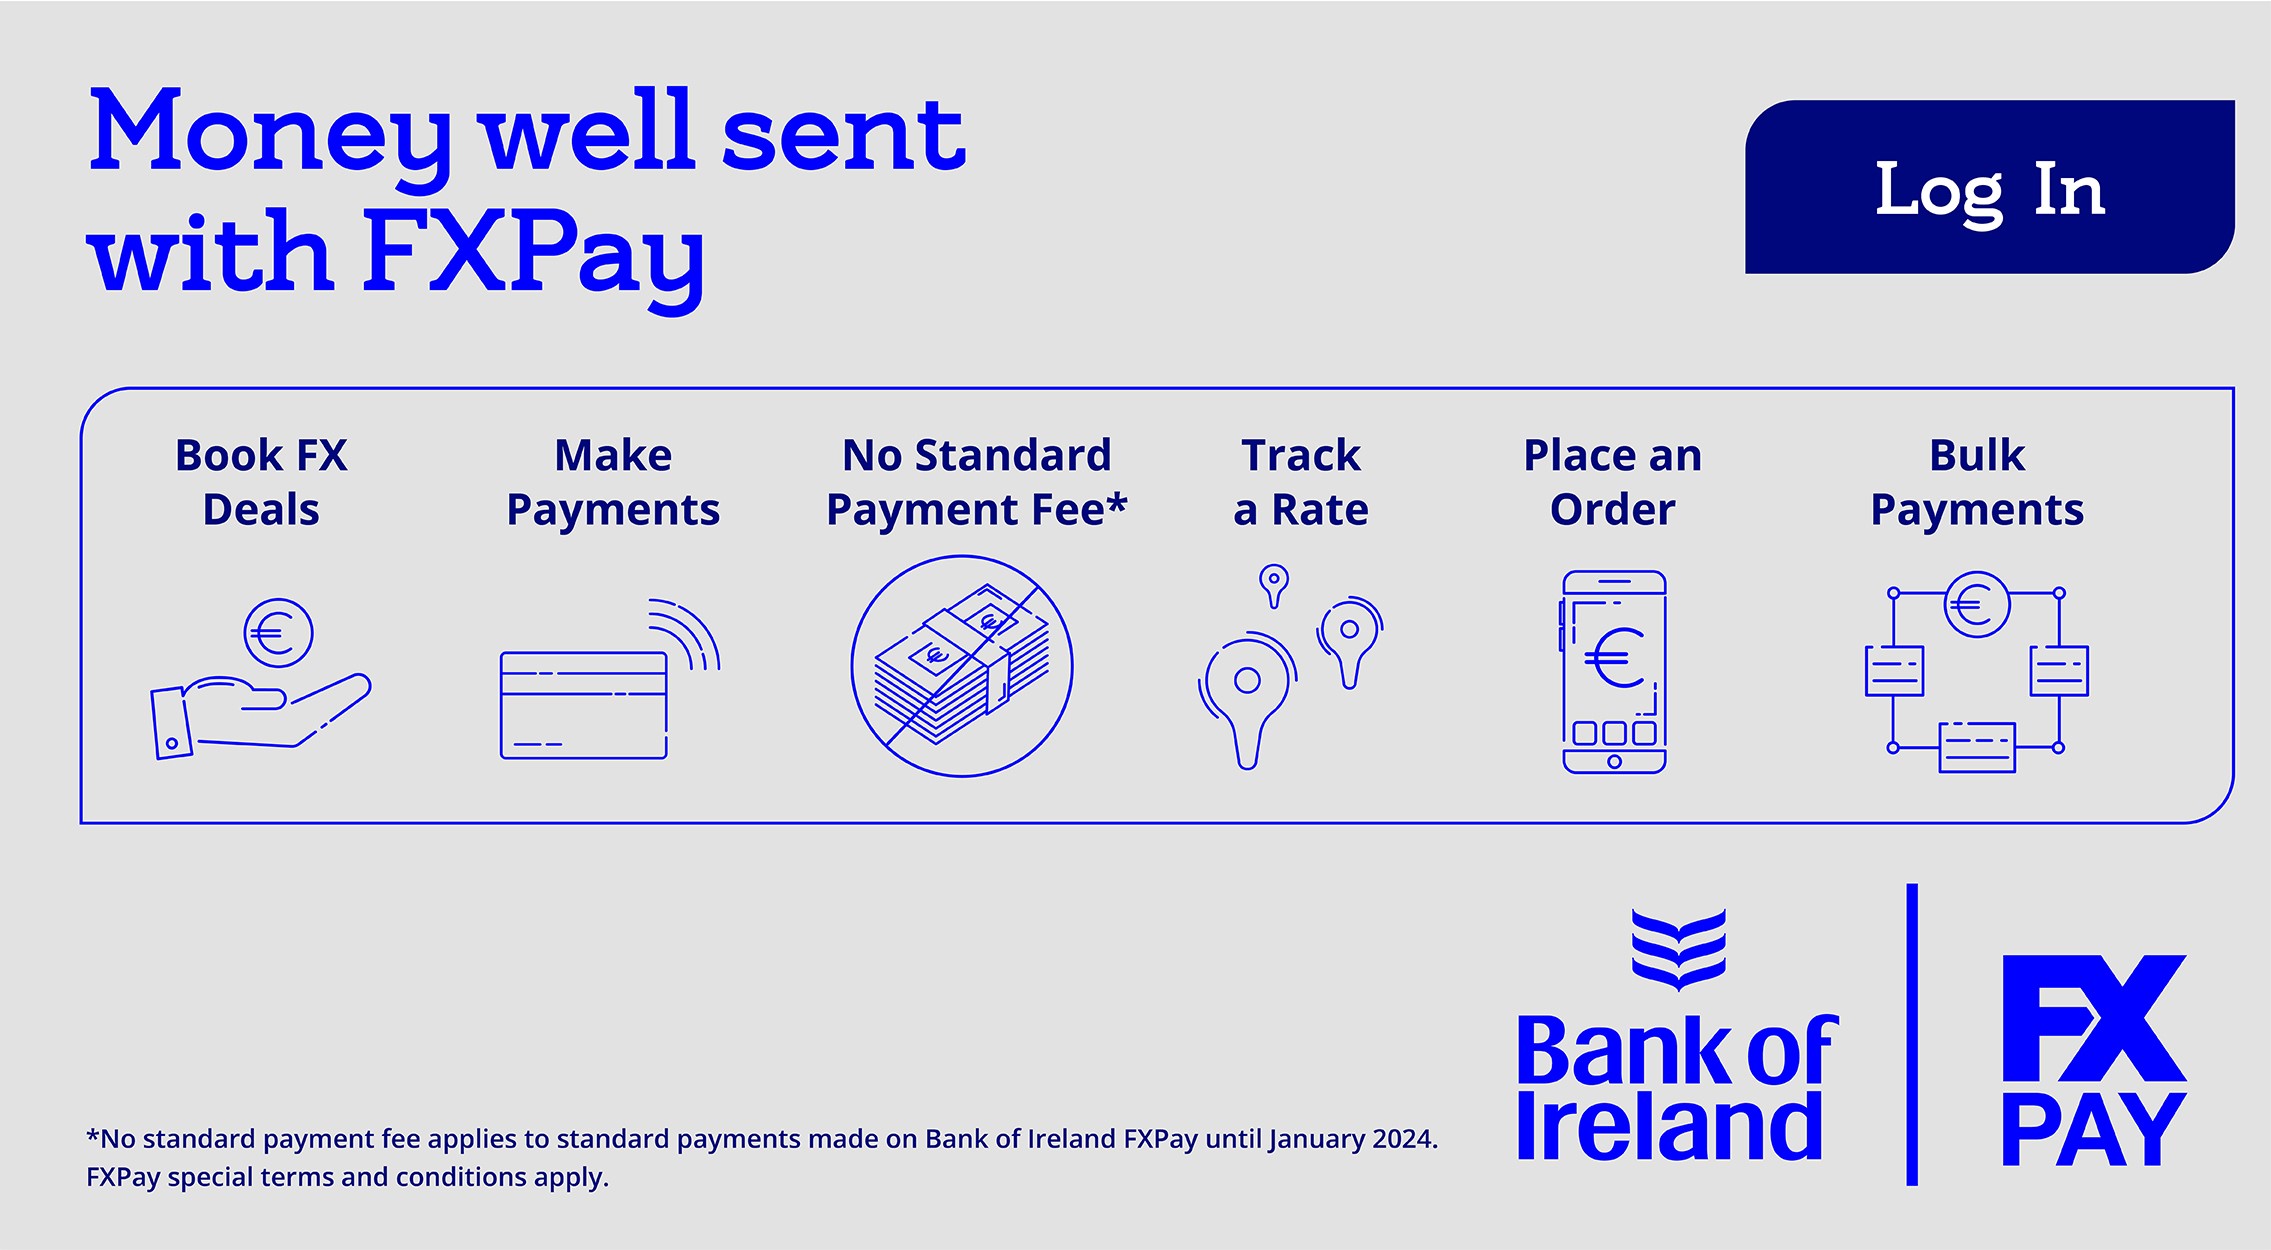 Money well sent with FX Pay Do so much more with FX Pay Book FX Deals Make Payments Add Payees Track a rate Place an Order No Standard Payment Fee Note: No Standard Payment Fee applies to standard payments made on Bank of Ireland FX Pay until January 2019